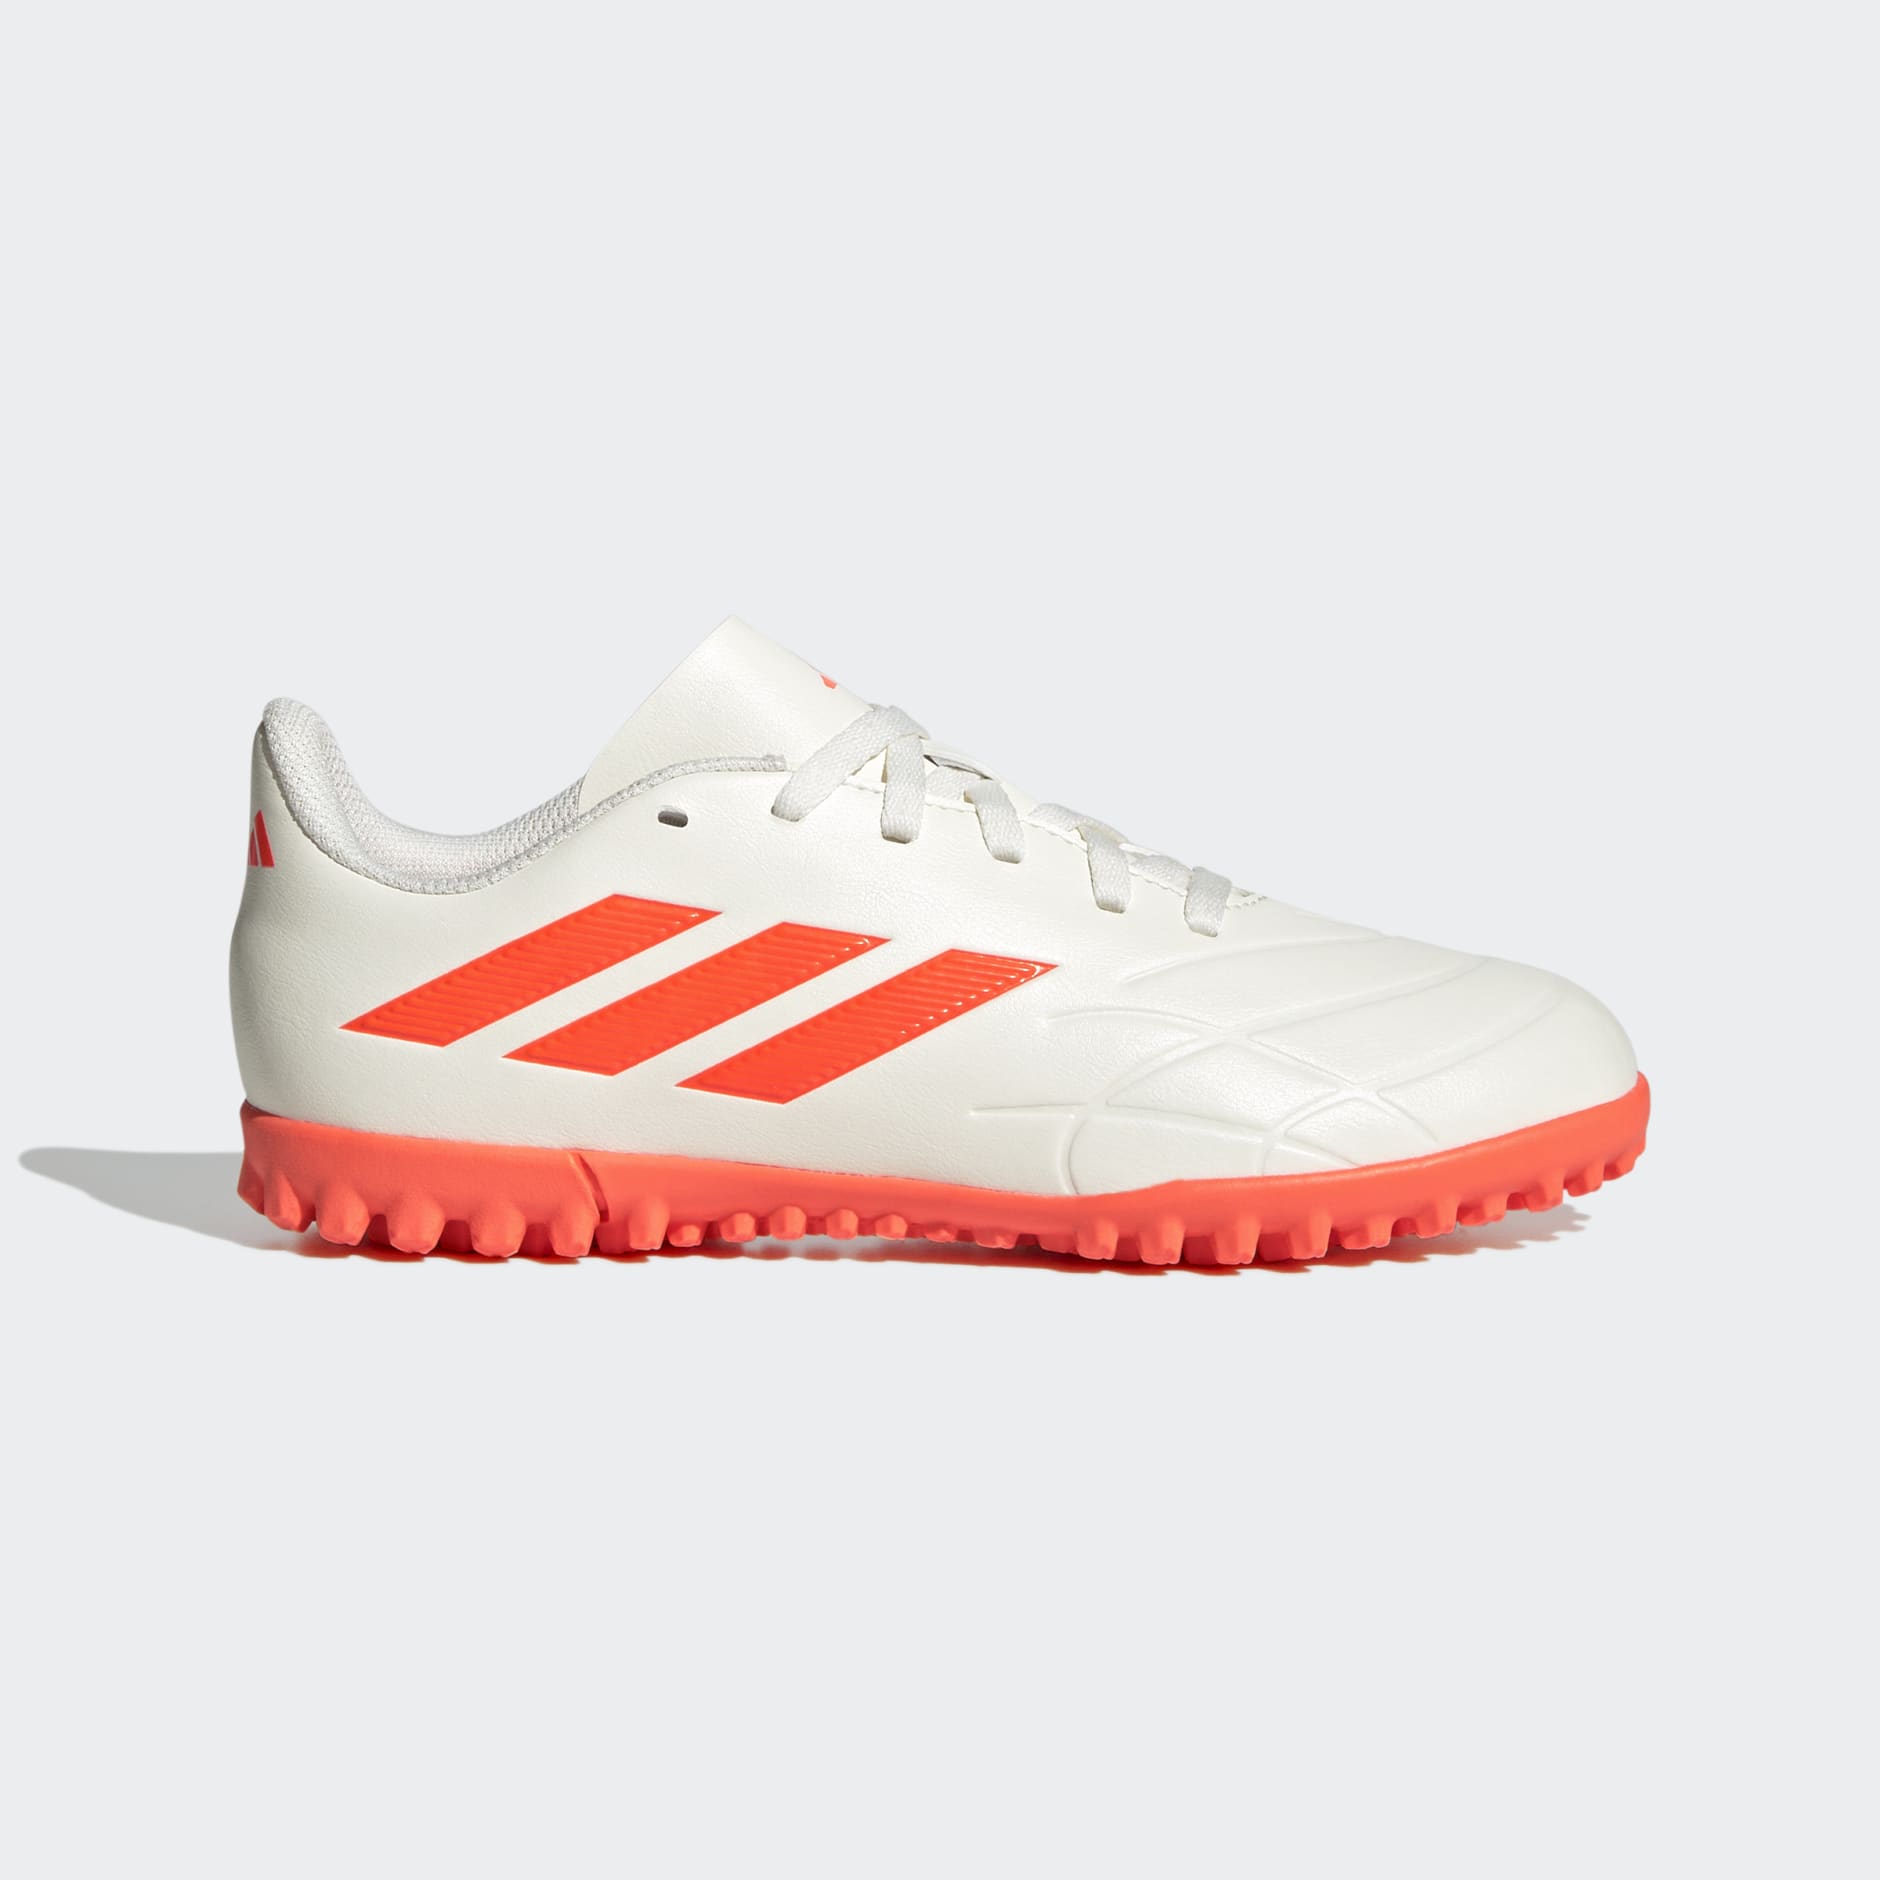 Shoes - Copa Pure.4 Turf Boots - White | adidas South Africa